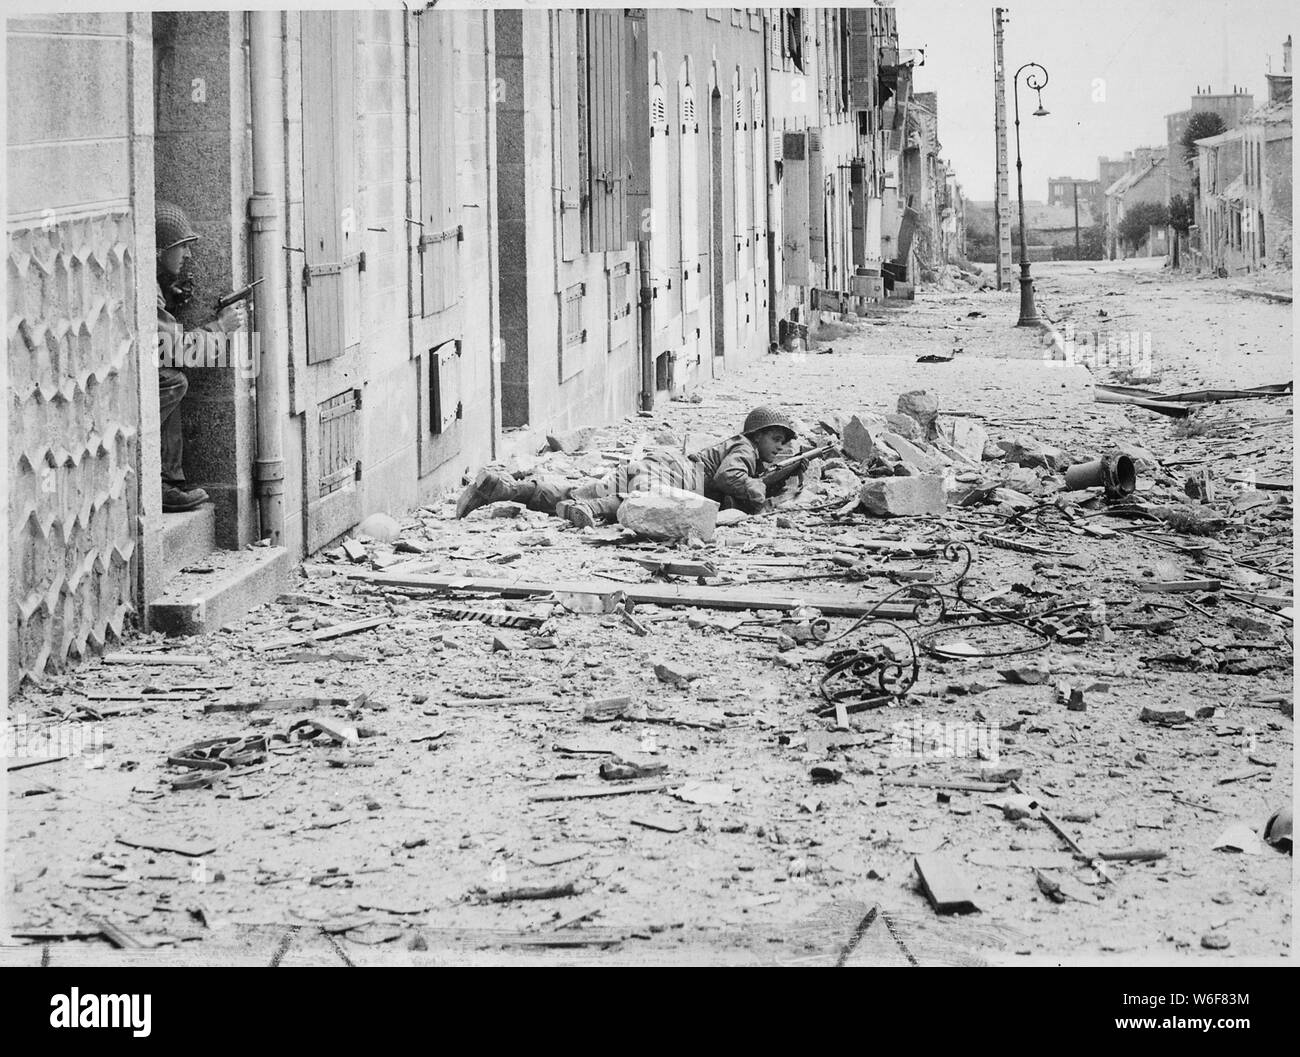 Americans take shelter during mop-up of Brest. Crouching behind a pile of rubble, a U.S. soldier watches for German snipers in the streets of Brest, while a companion covers him from behind a doorway. International News Photos.; General notes:  Use War and Conflict Number 1054 when ordering a reproduction or requesting information about this image. Stock Photo